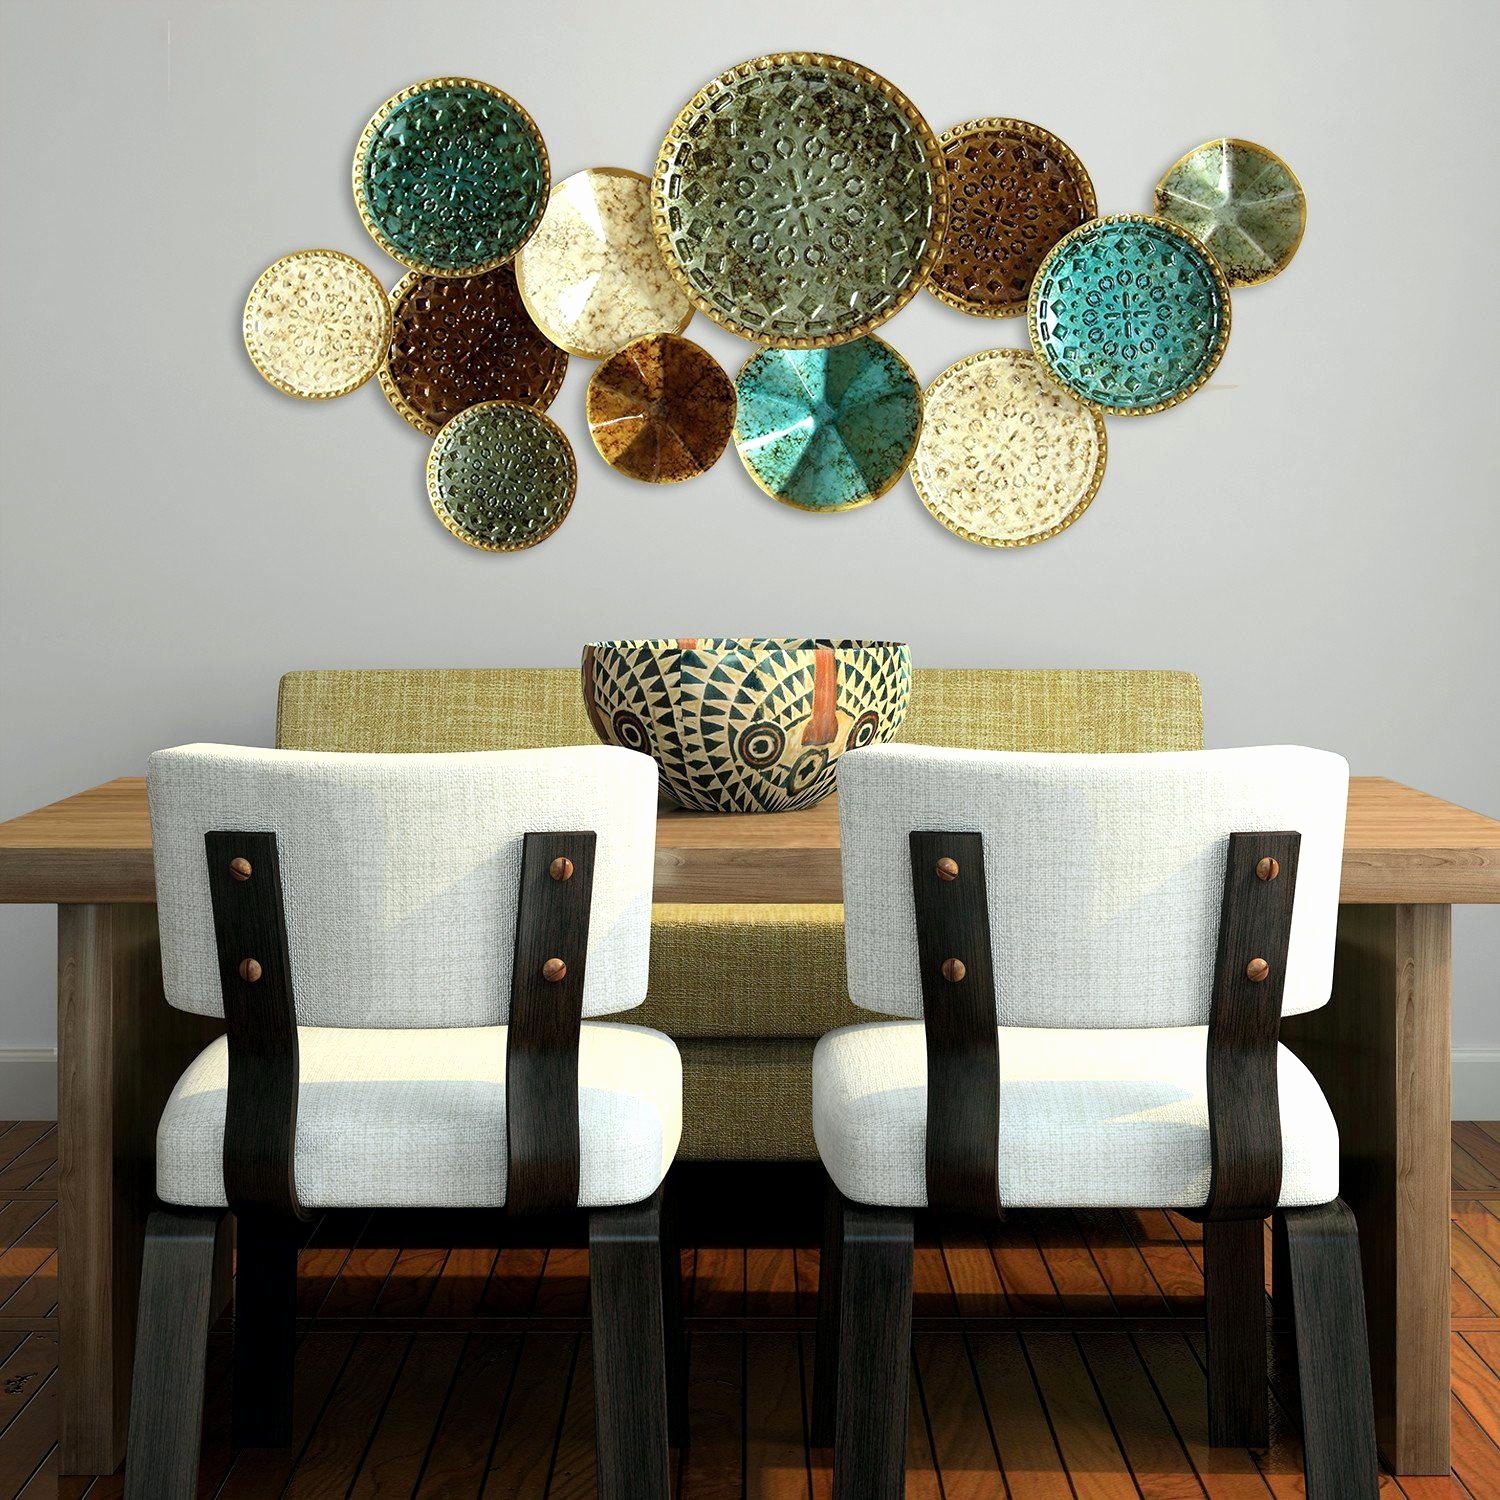 Decorative Plates For Kitchen Wall You\u0026#39;ll Love in 2021 - VisualHunt